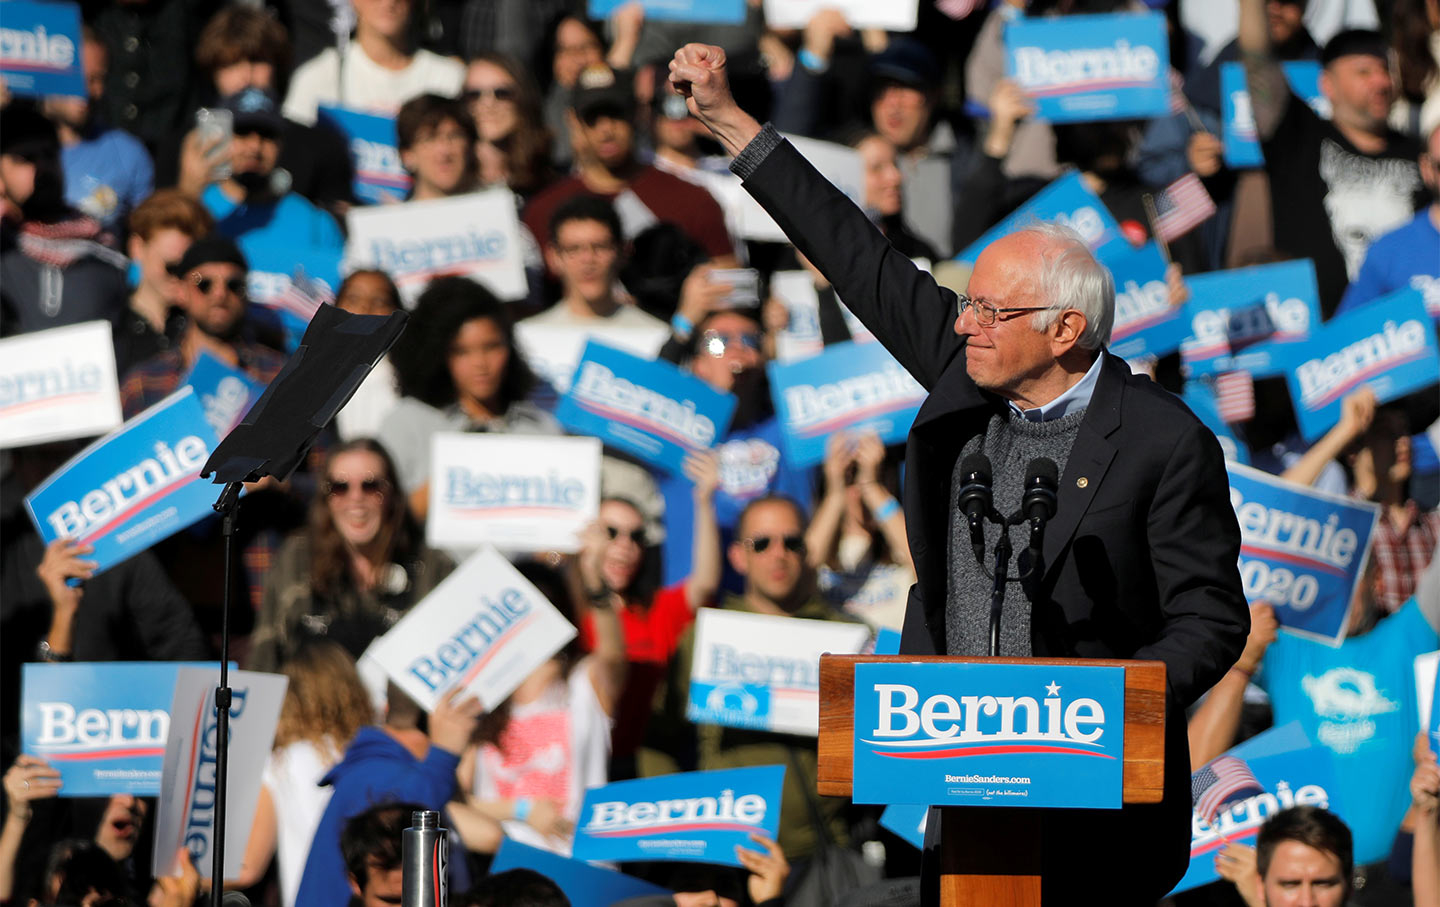 More Than a Campaign: Bernie’s Candidacy Is a Movement